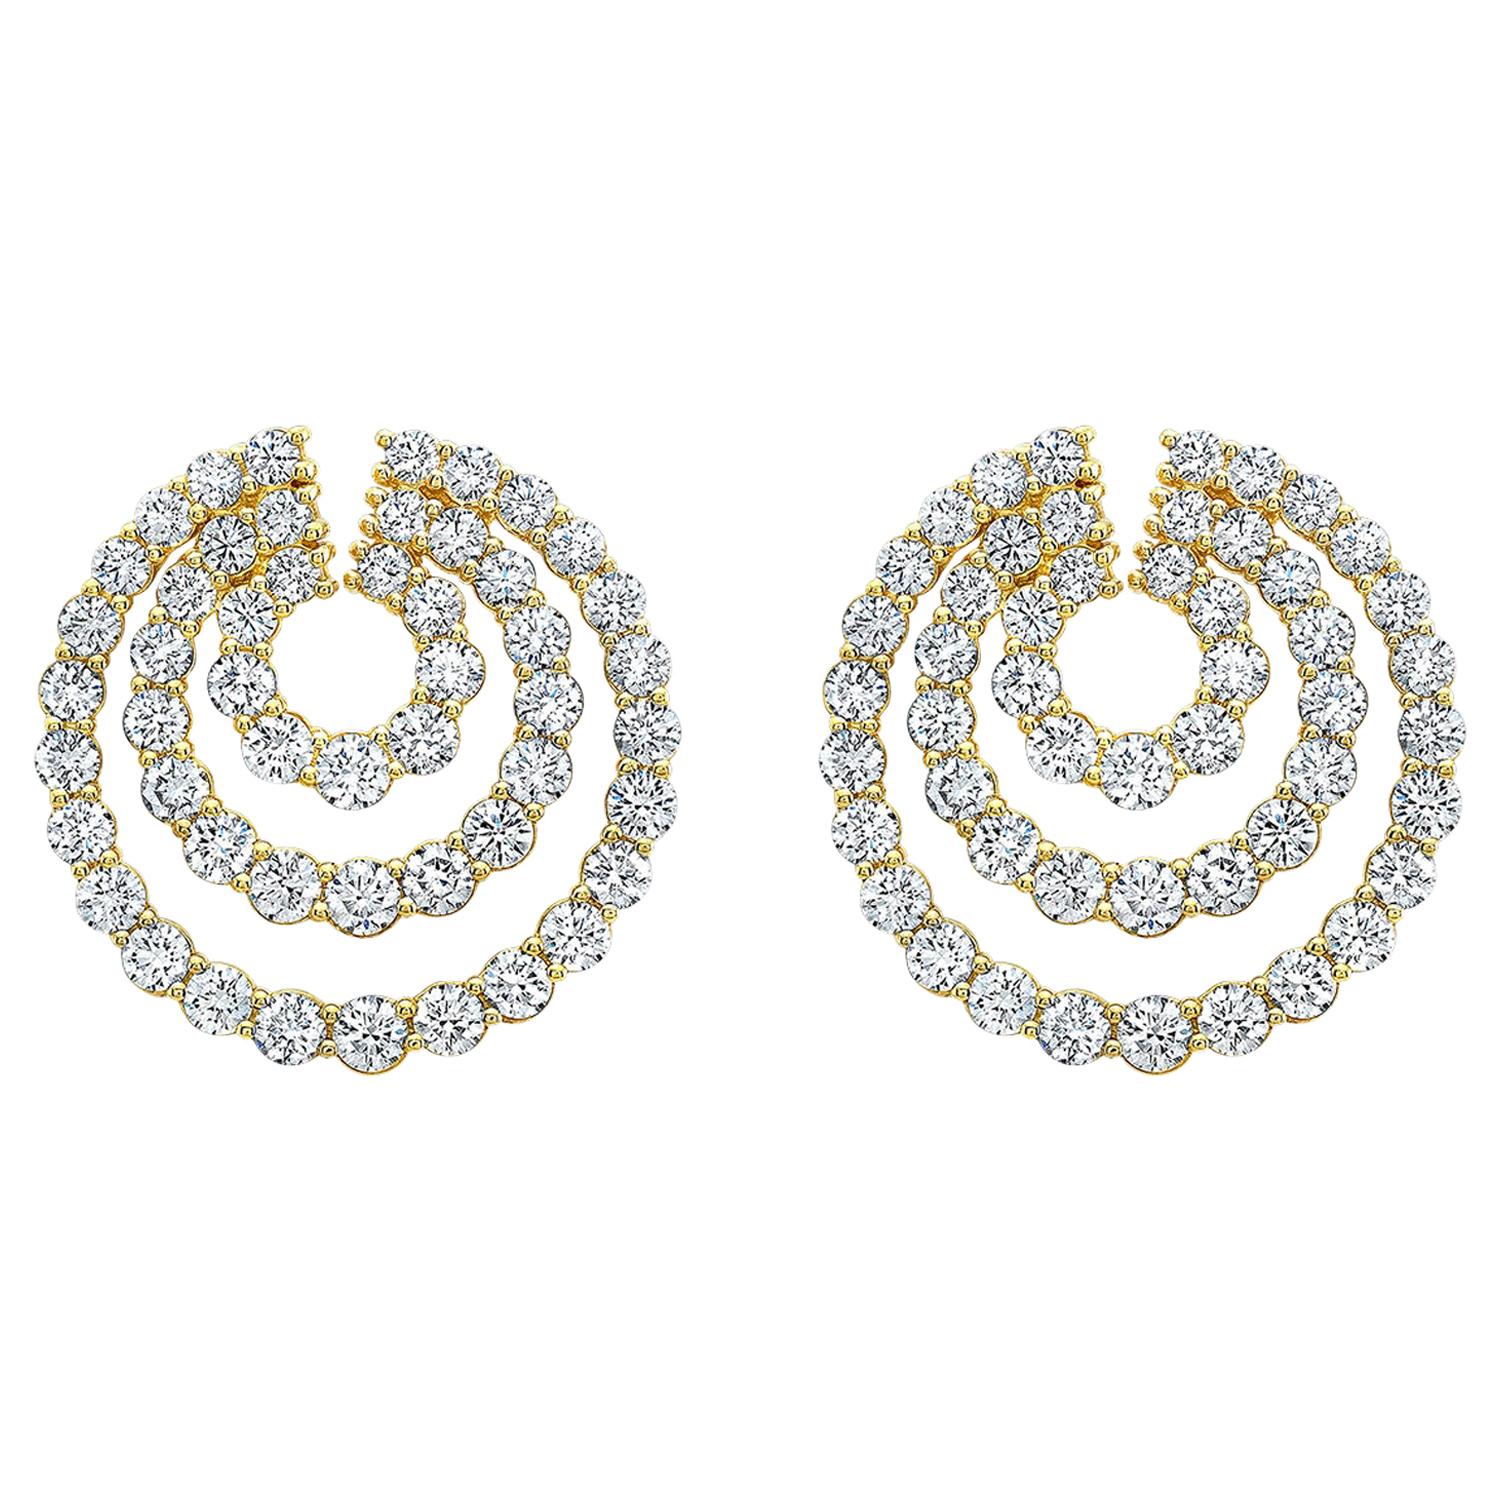 Swirl Earrings with Round Brilliant Cut Diamonds For Sale